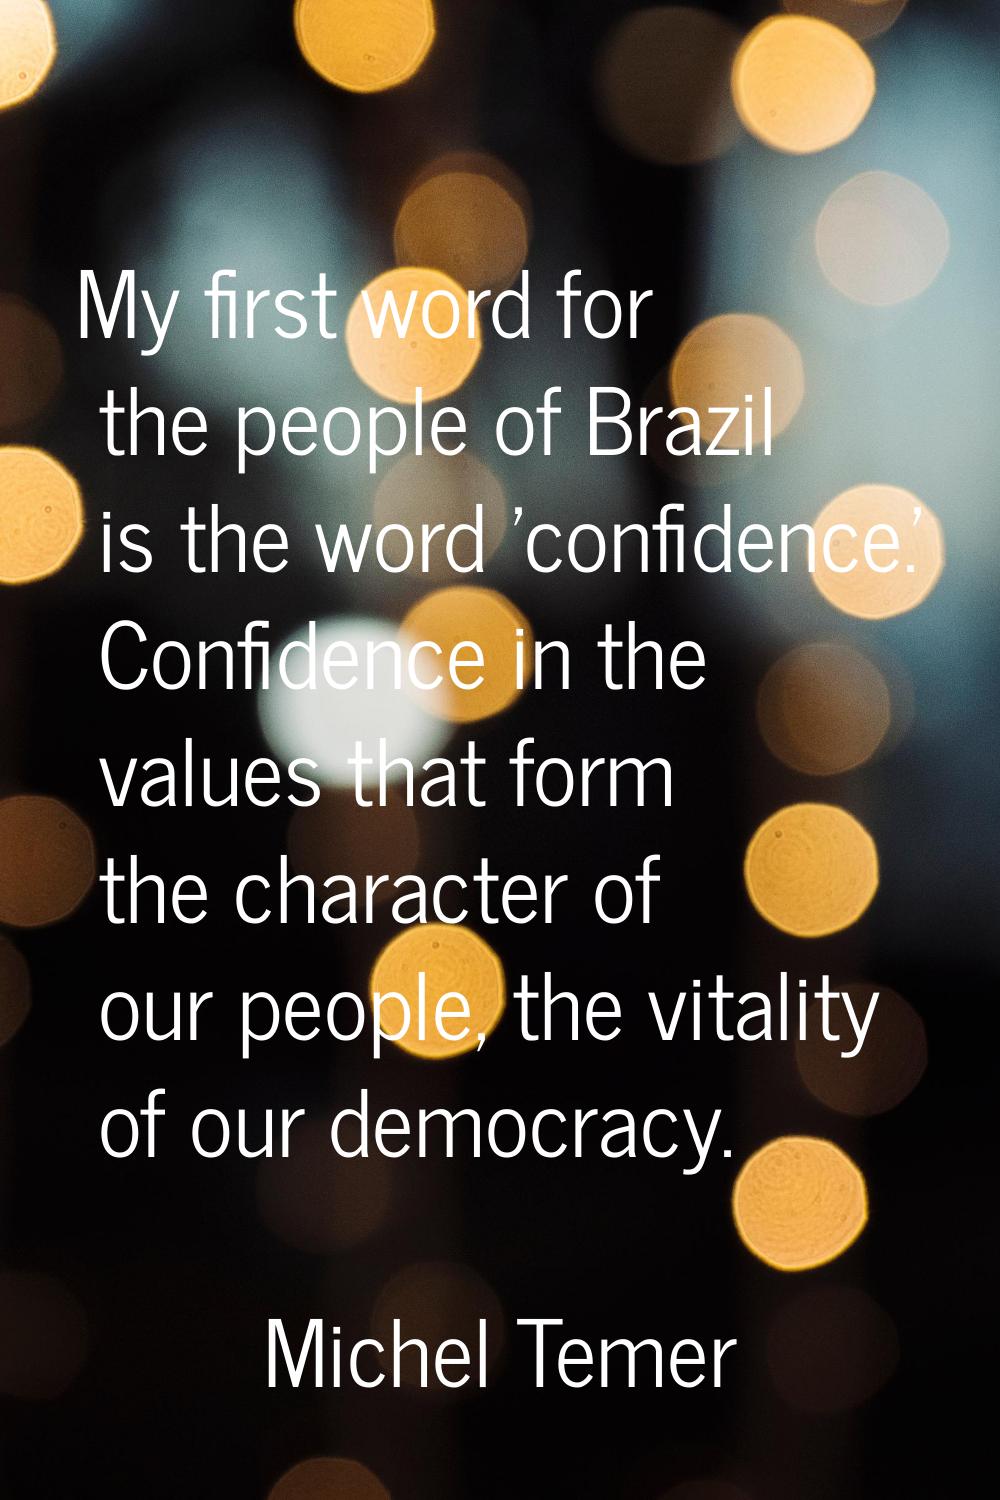 My first word for the people of Brazil is the word 'confidence.' Confidence in the values that form